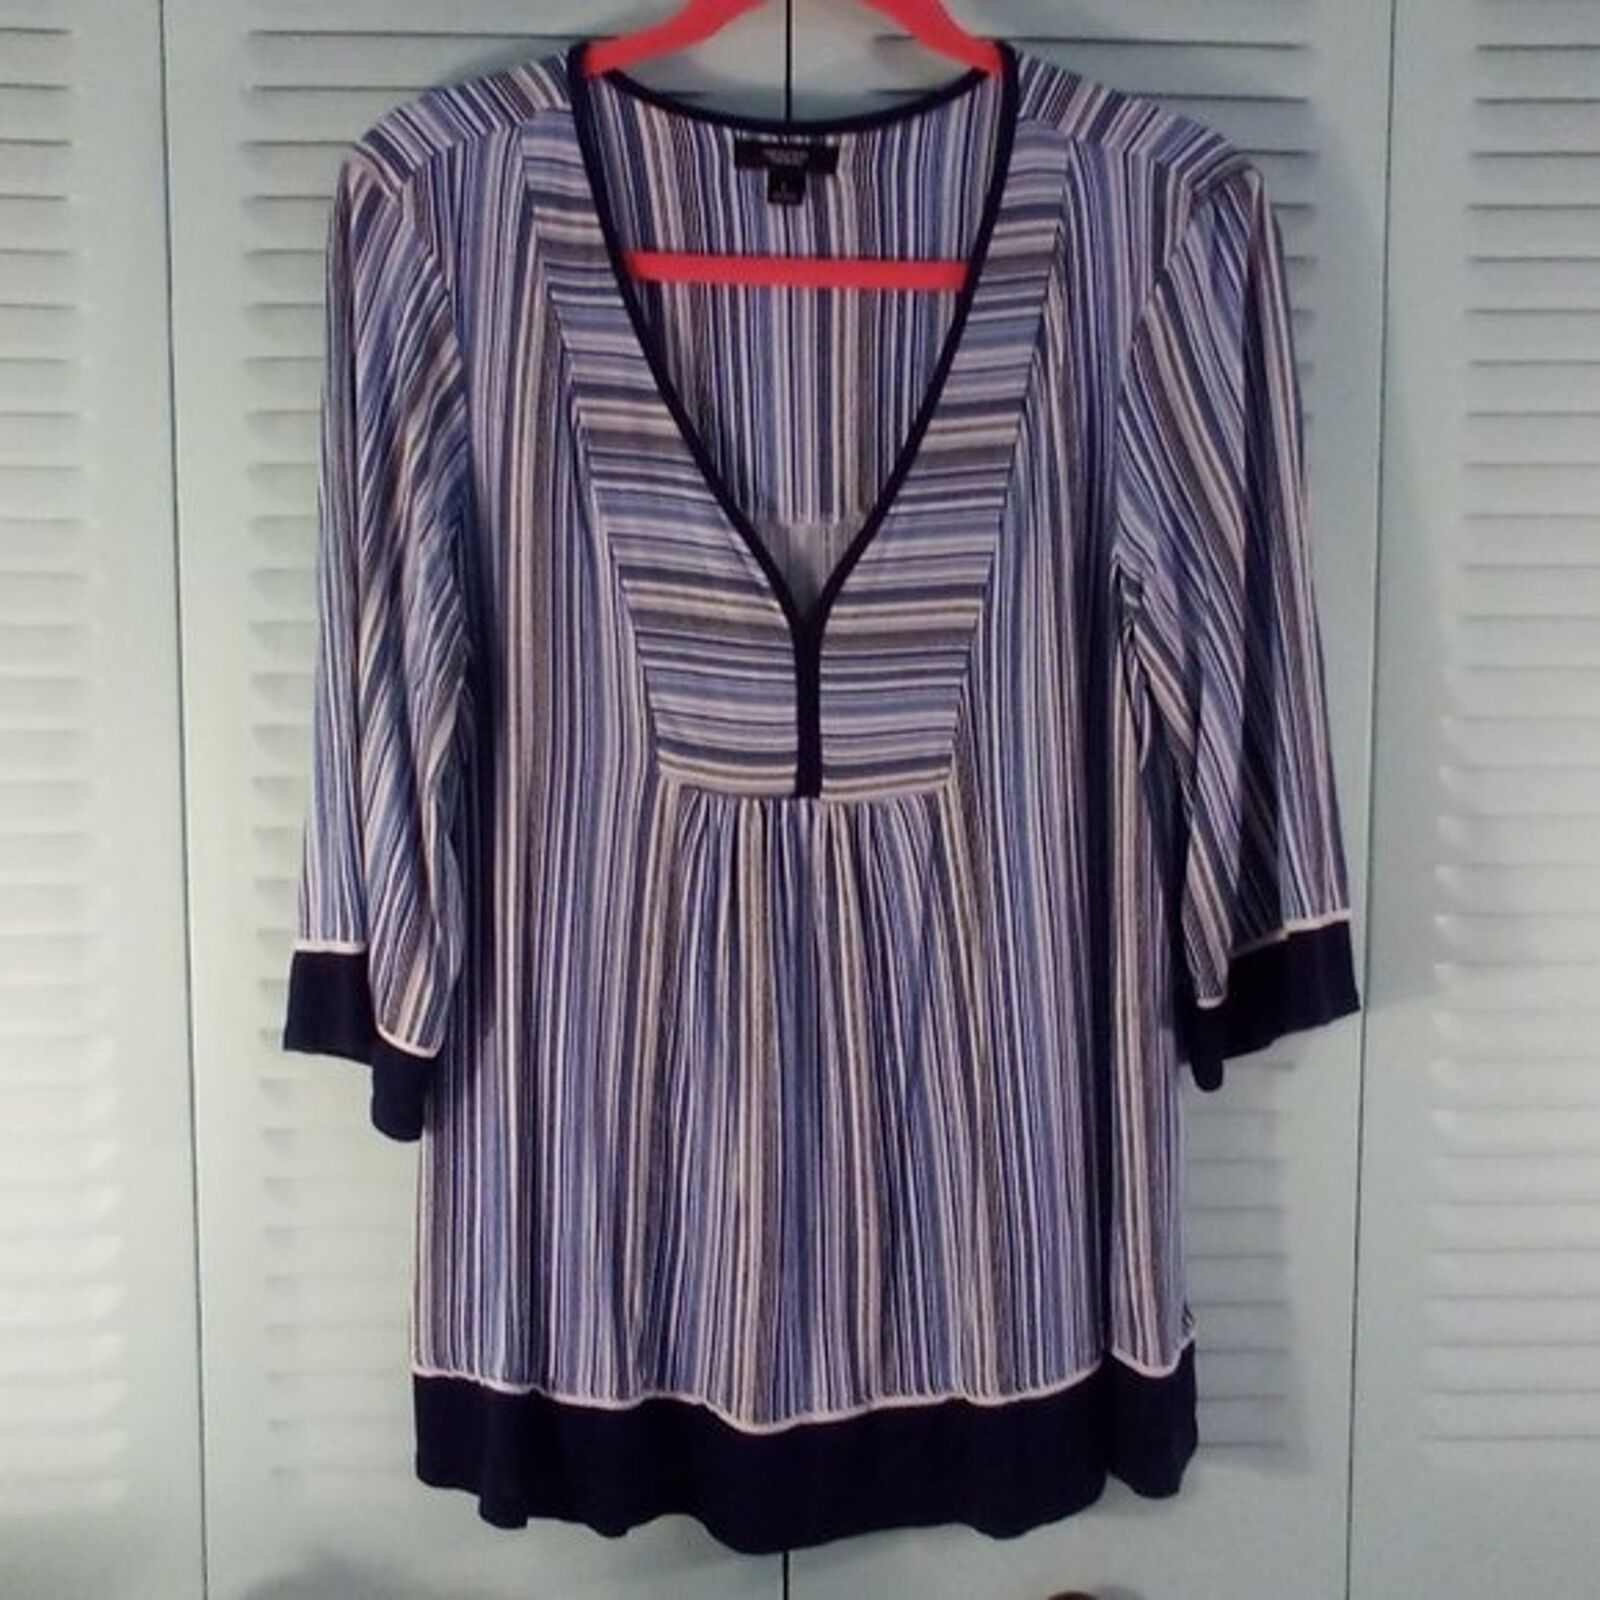 Simply Vera Vera Wang blue and white striped top With yolk that has navy trim, L